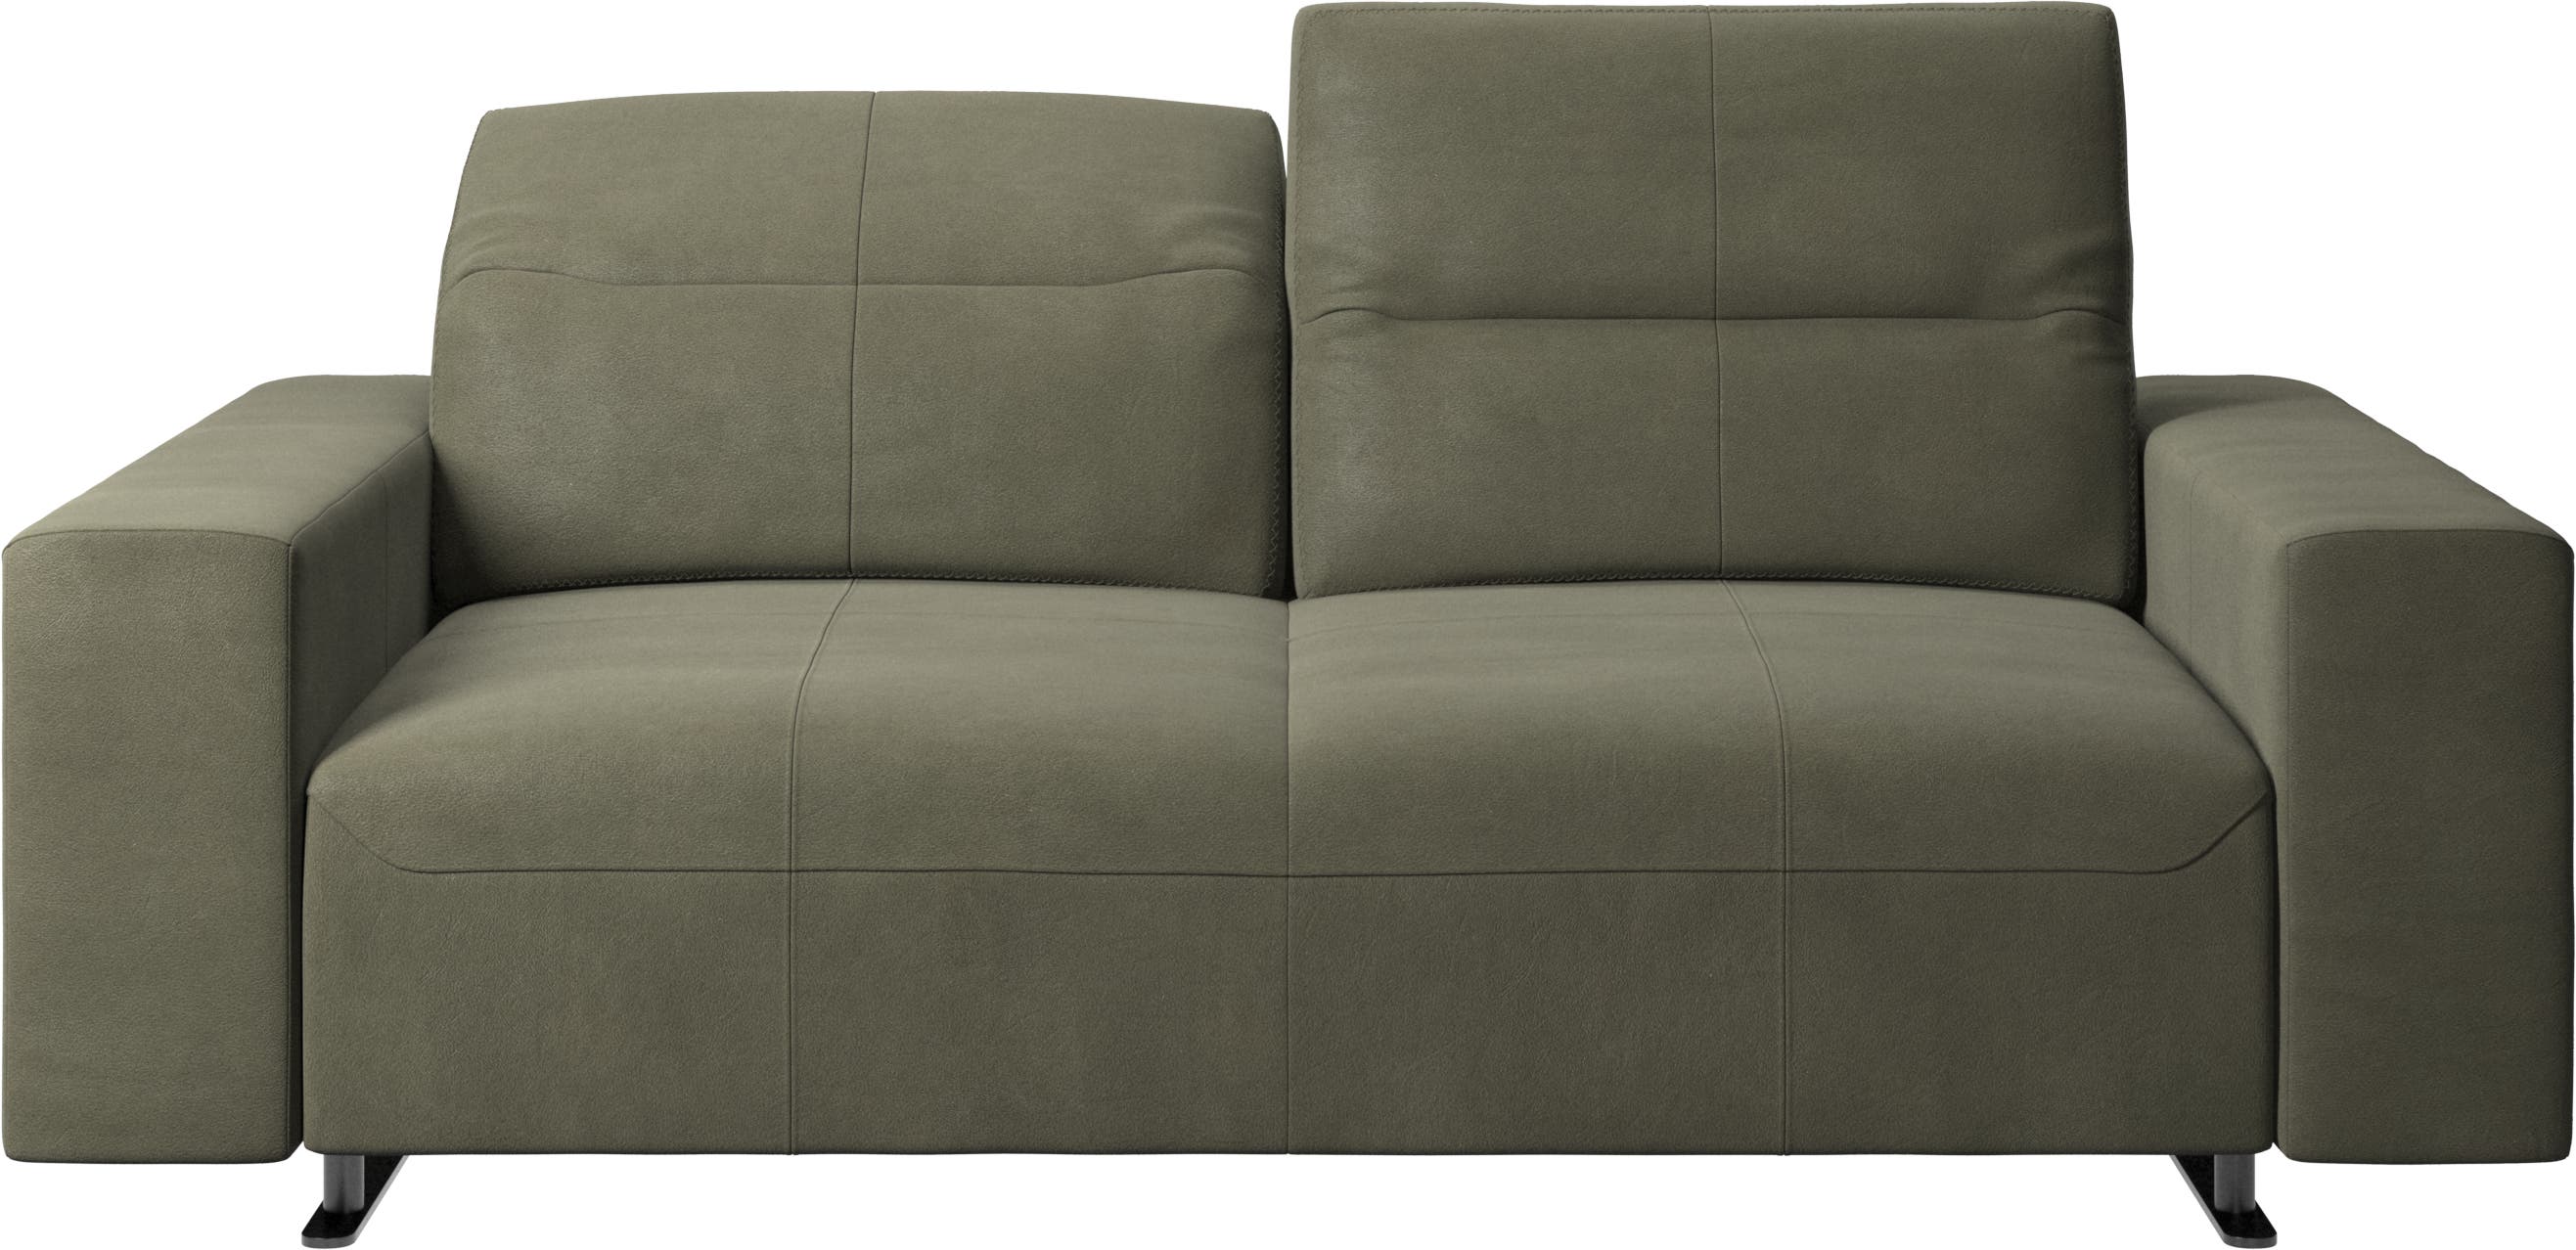 Hampton sofa with adjustable back and storage on the right side